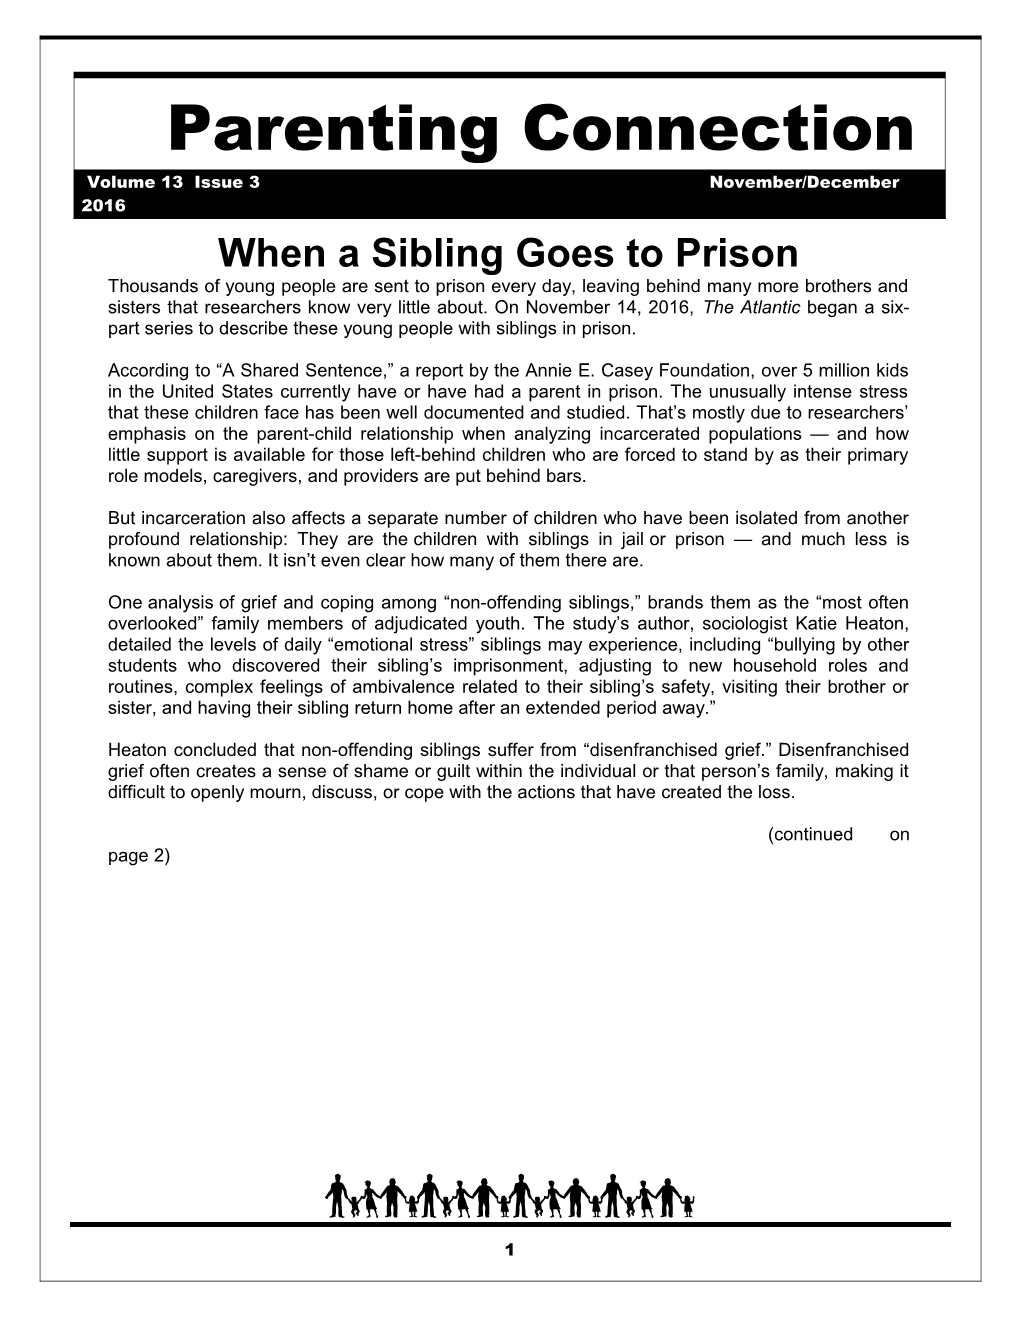 When a Sibling Goes to Prison